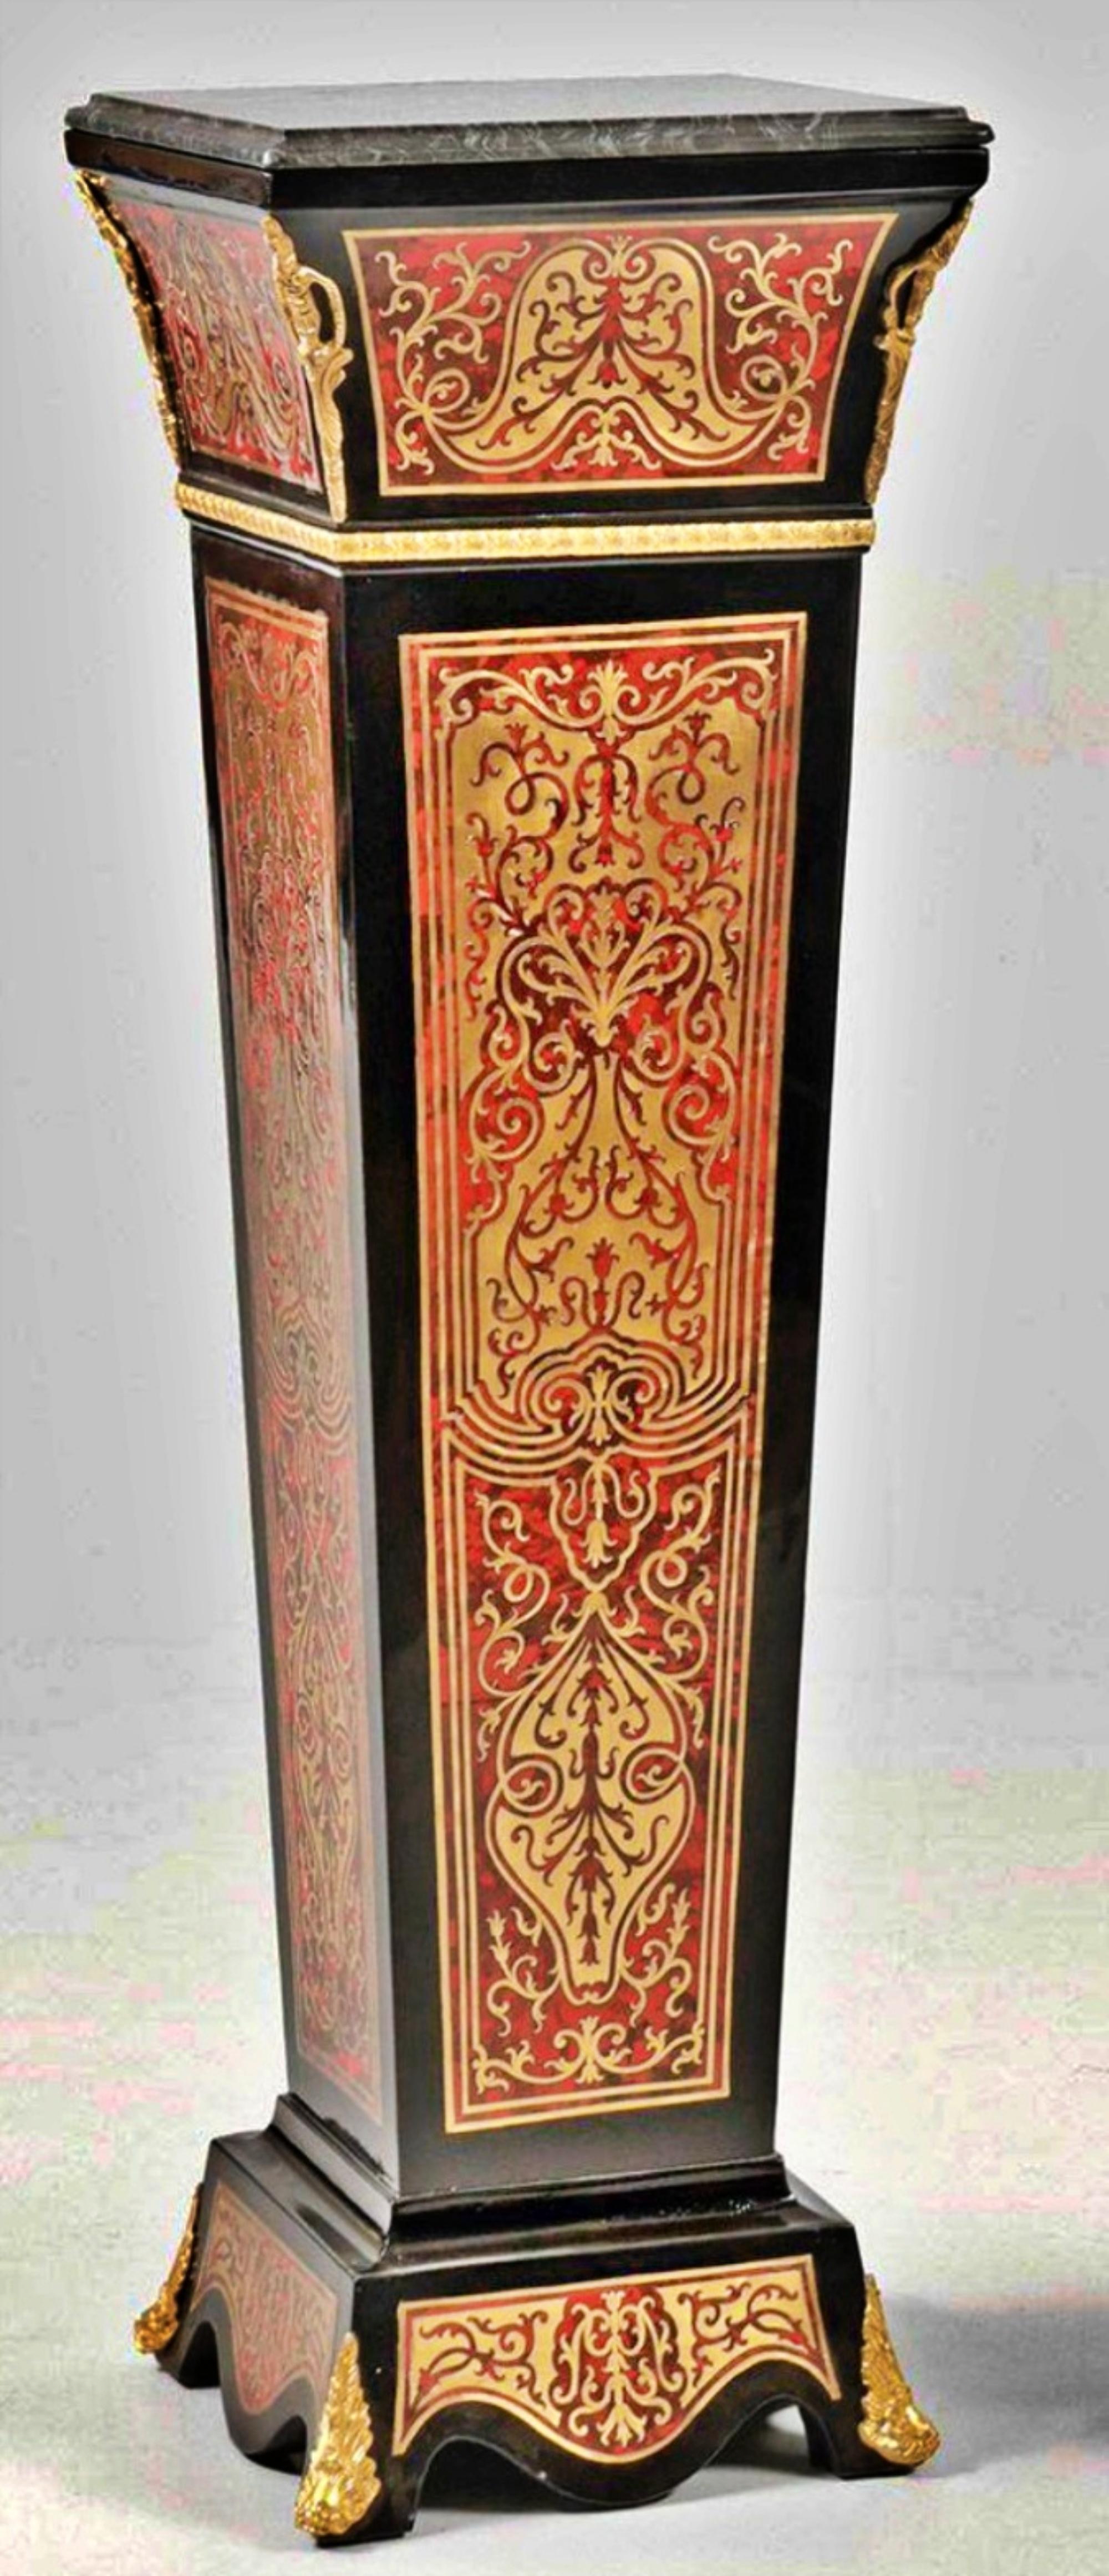 Pair of large Boulle-style pedestals
Black lacquered wood and inlay made of lacquer with a red background and brass in the so-called Boulle technique. Above a curved, slightly concave junction, a sturdy conical widened shaft supporting a square